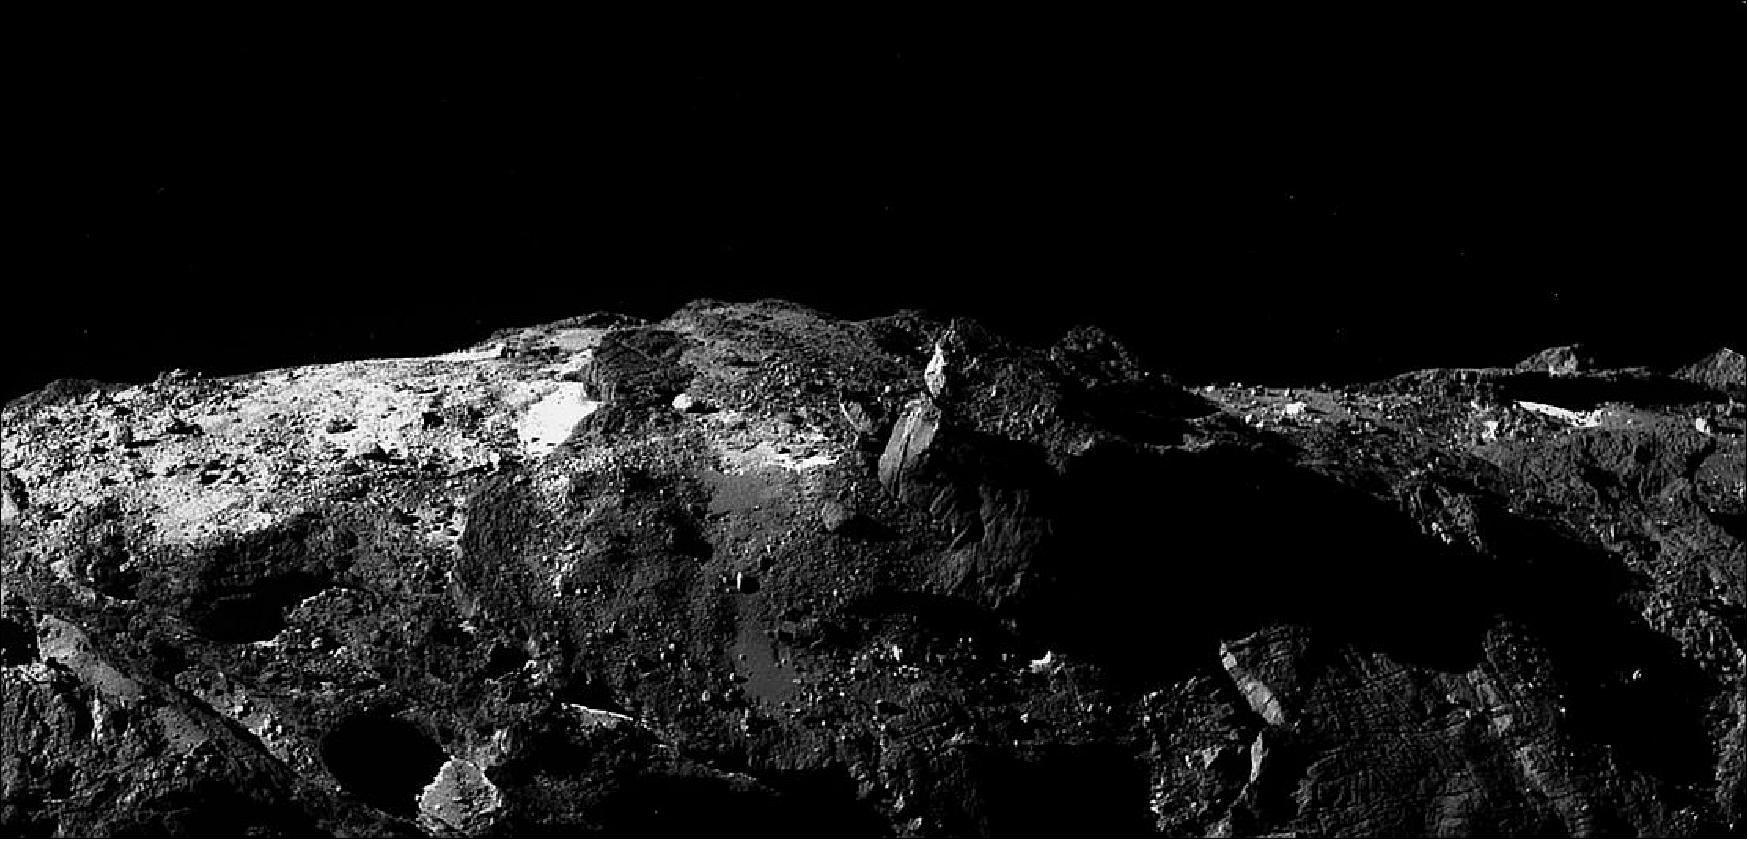 Figure 72: This image shows a section of 67P/C-G as viewed by Rosetta's high-resolution camera OSIRIS on 10 February 2016. Amateur astronomer Stuart Atkinson, from the UK, selected and processed this view from the OSIRIS image archive. It is a crop of a larger image that shows a slightly wider view of the comet's ‘Bes' region on body of the comet, which takes its name from the protective deity of households, children and mothers (image credit: ESA/Rosetta/MPS for OSIRIS Team MPS/UPD/LAM/IAA/SSO/INTA/UPM/DASP/IDA – CC BY SA 4.0; Acknowledgement: S Atkinson)